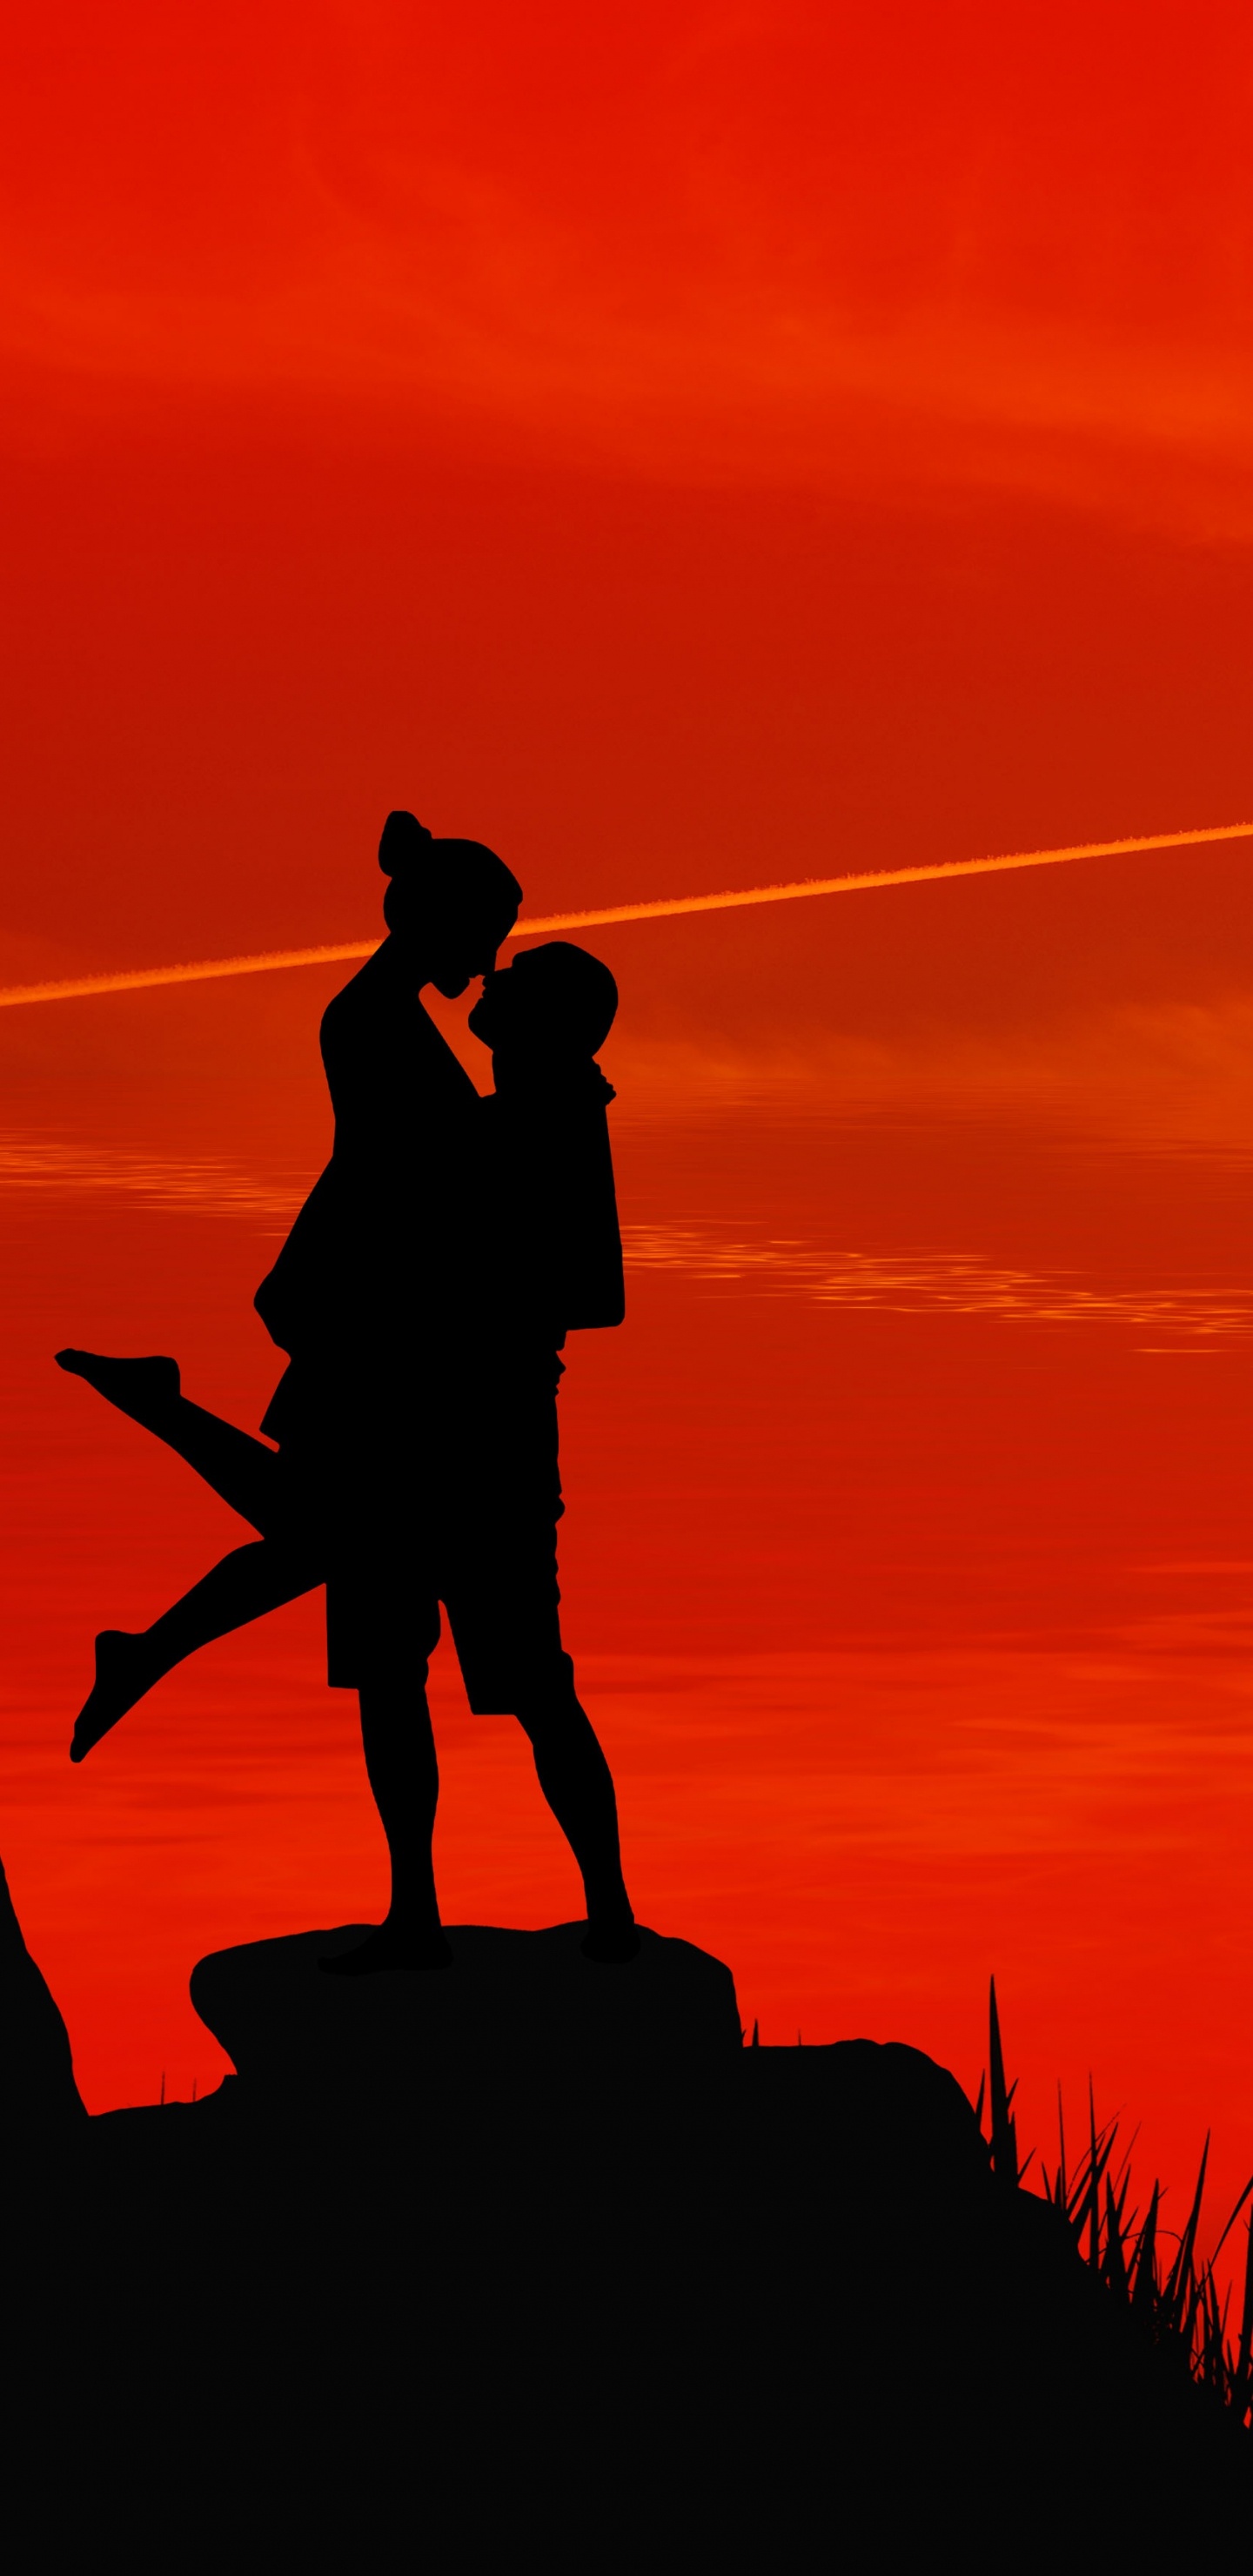 Silhouette, Sunset, Passion, People in Nature, Red. Wallpaper in 1440x2960 Resolution